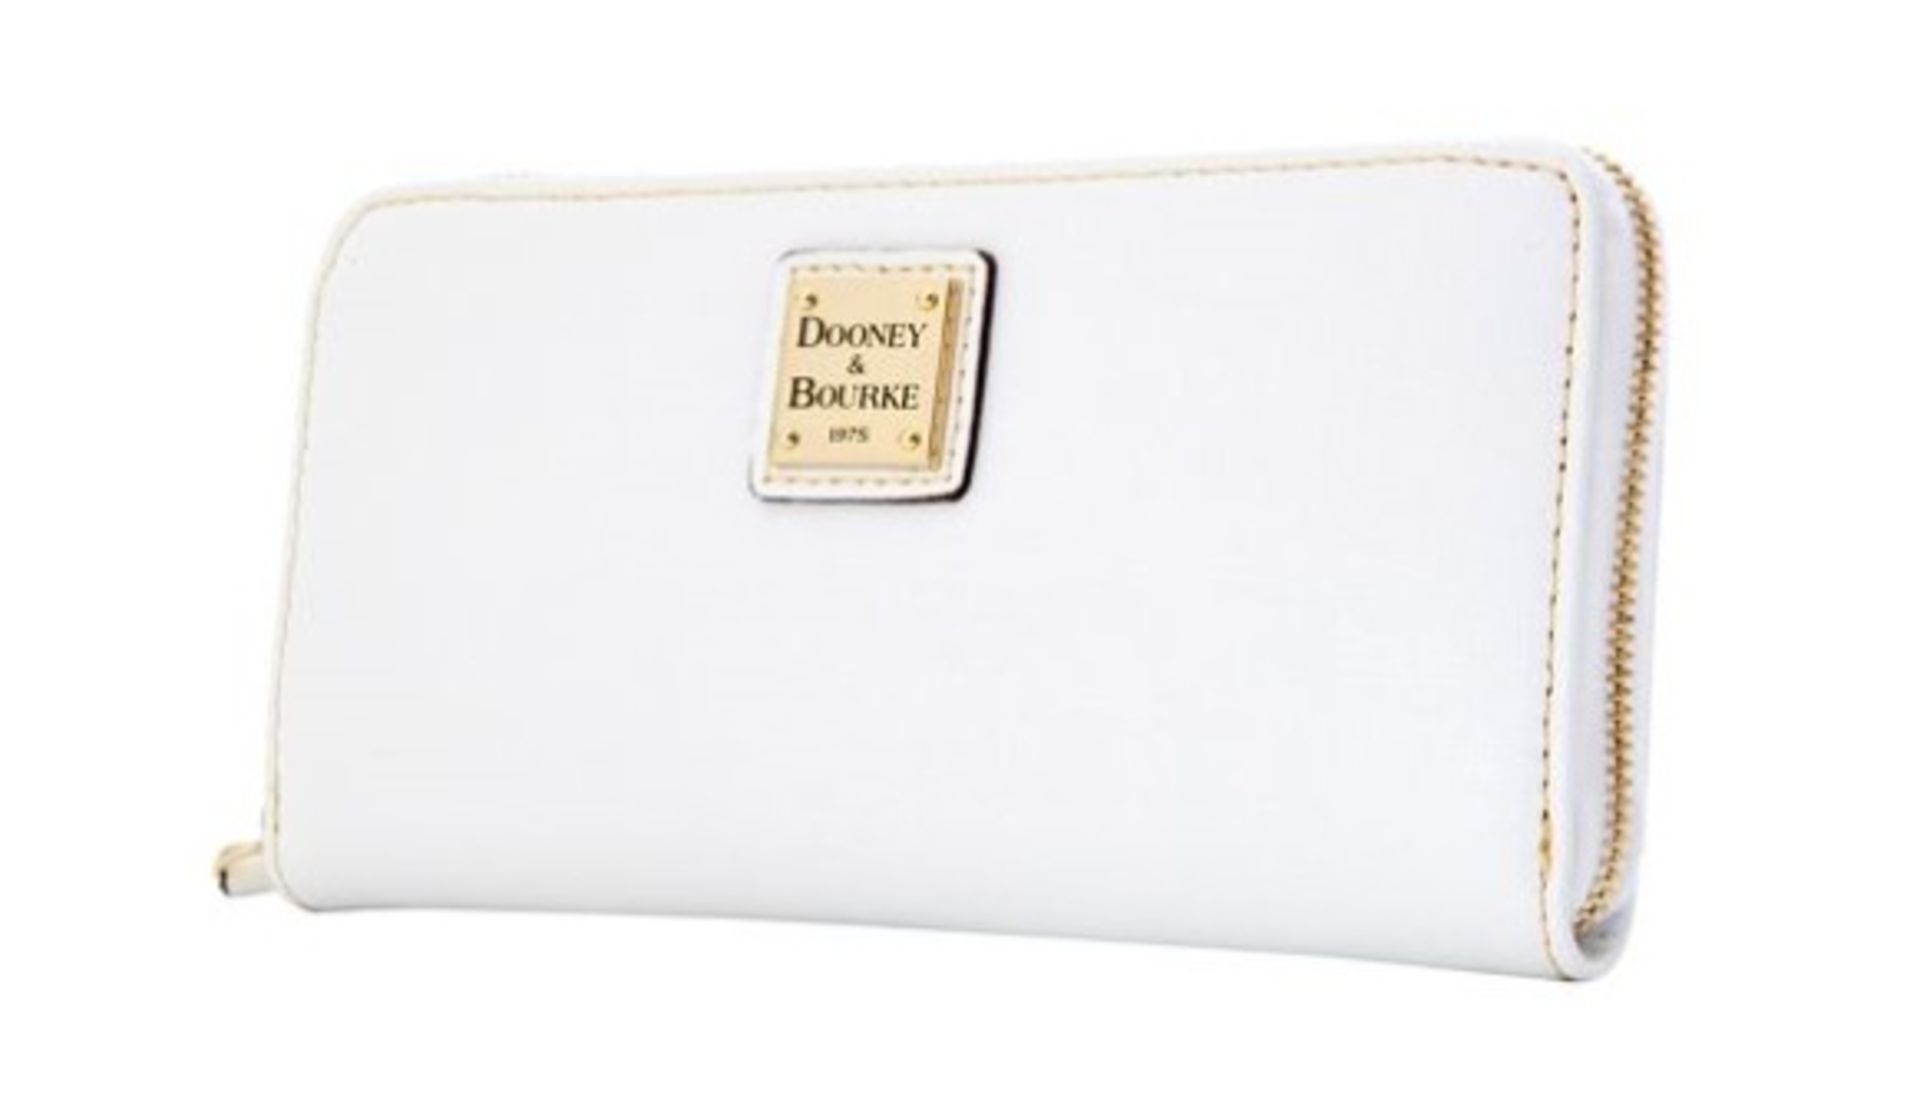 Dooney & Bourke Saffiano Large Zip Around Wallet Colour White RRP £83 - Image 2 of 2